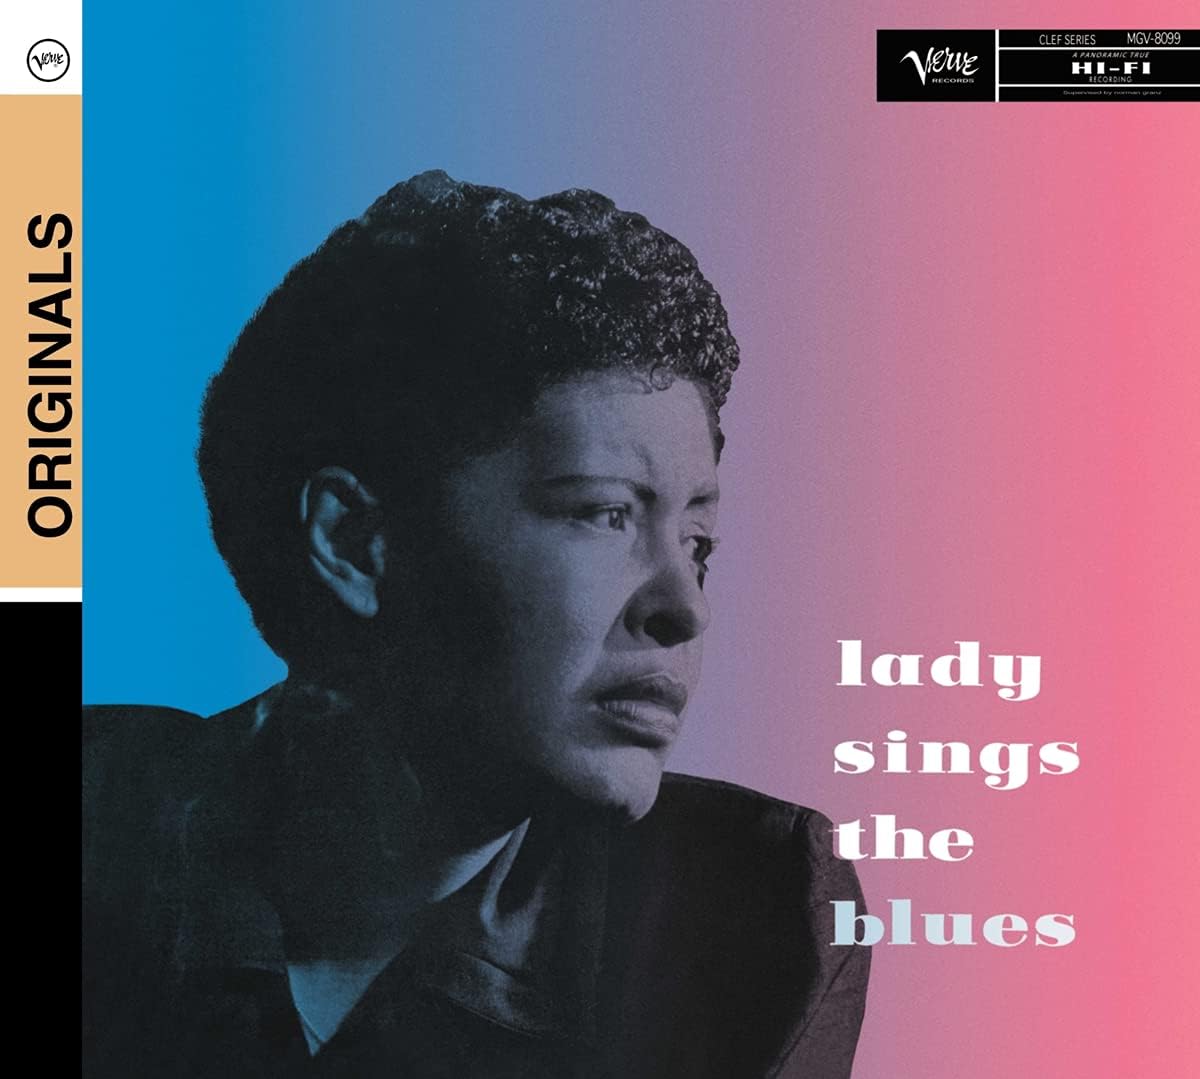 Billie Holiday - Lady sings the blues (Vinile 180gr.)